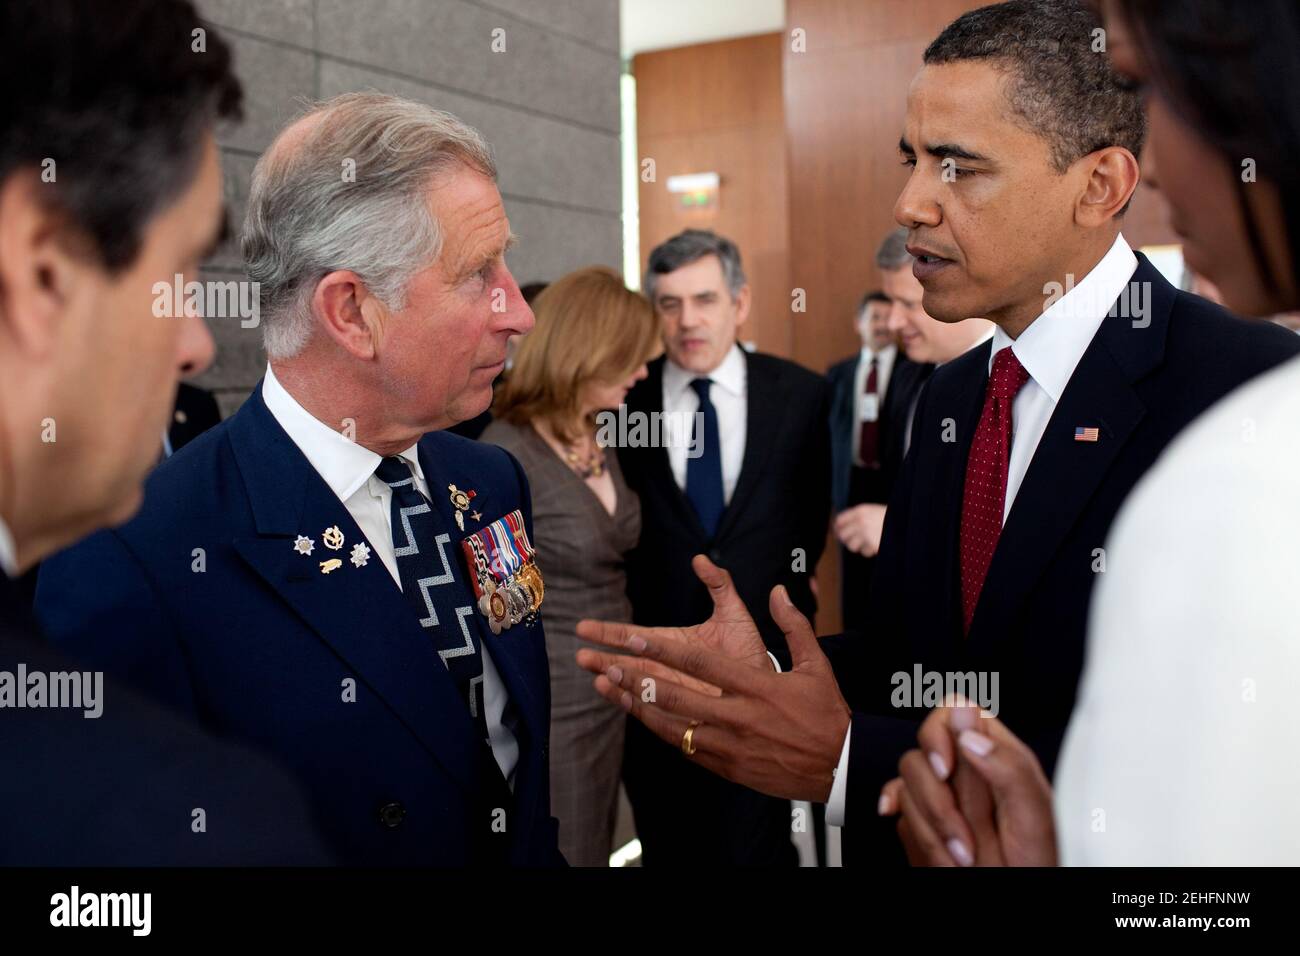 President Barack Obama speaks with Prince Charles following the President's speech at the memorial service at the Normandy American Cemetery in Colleville-sur-Mer, France, on the 65th anniversary of the D-Day landings, June 6, 2009. Stock Photo